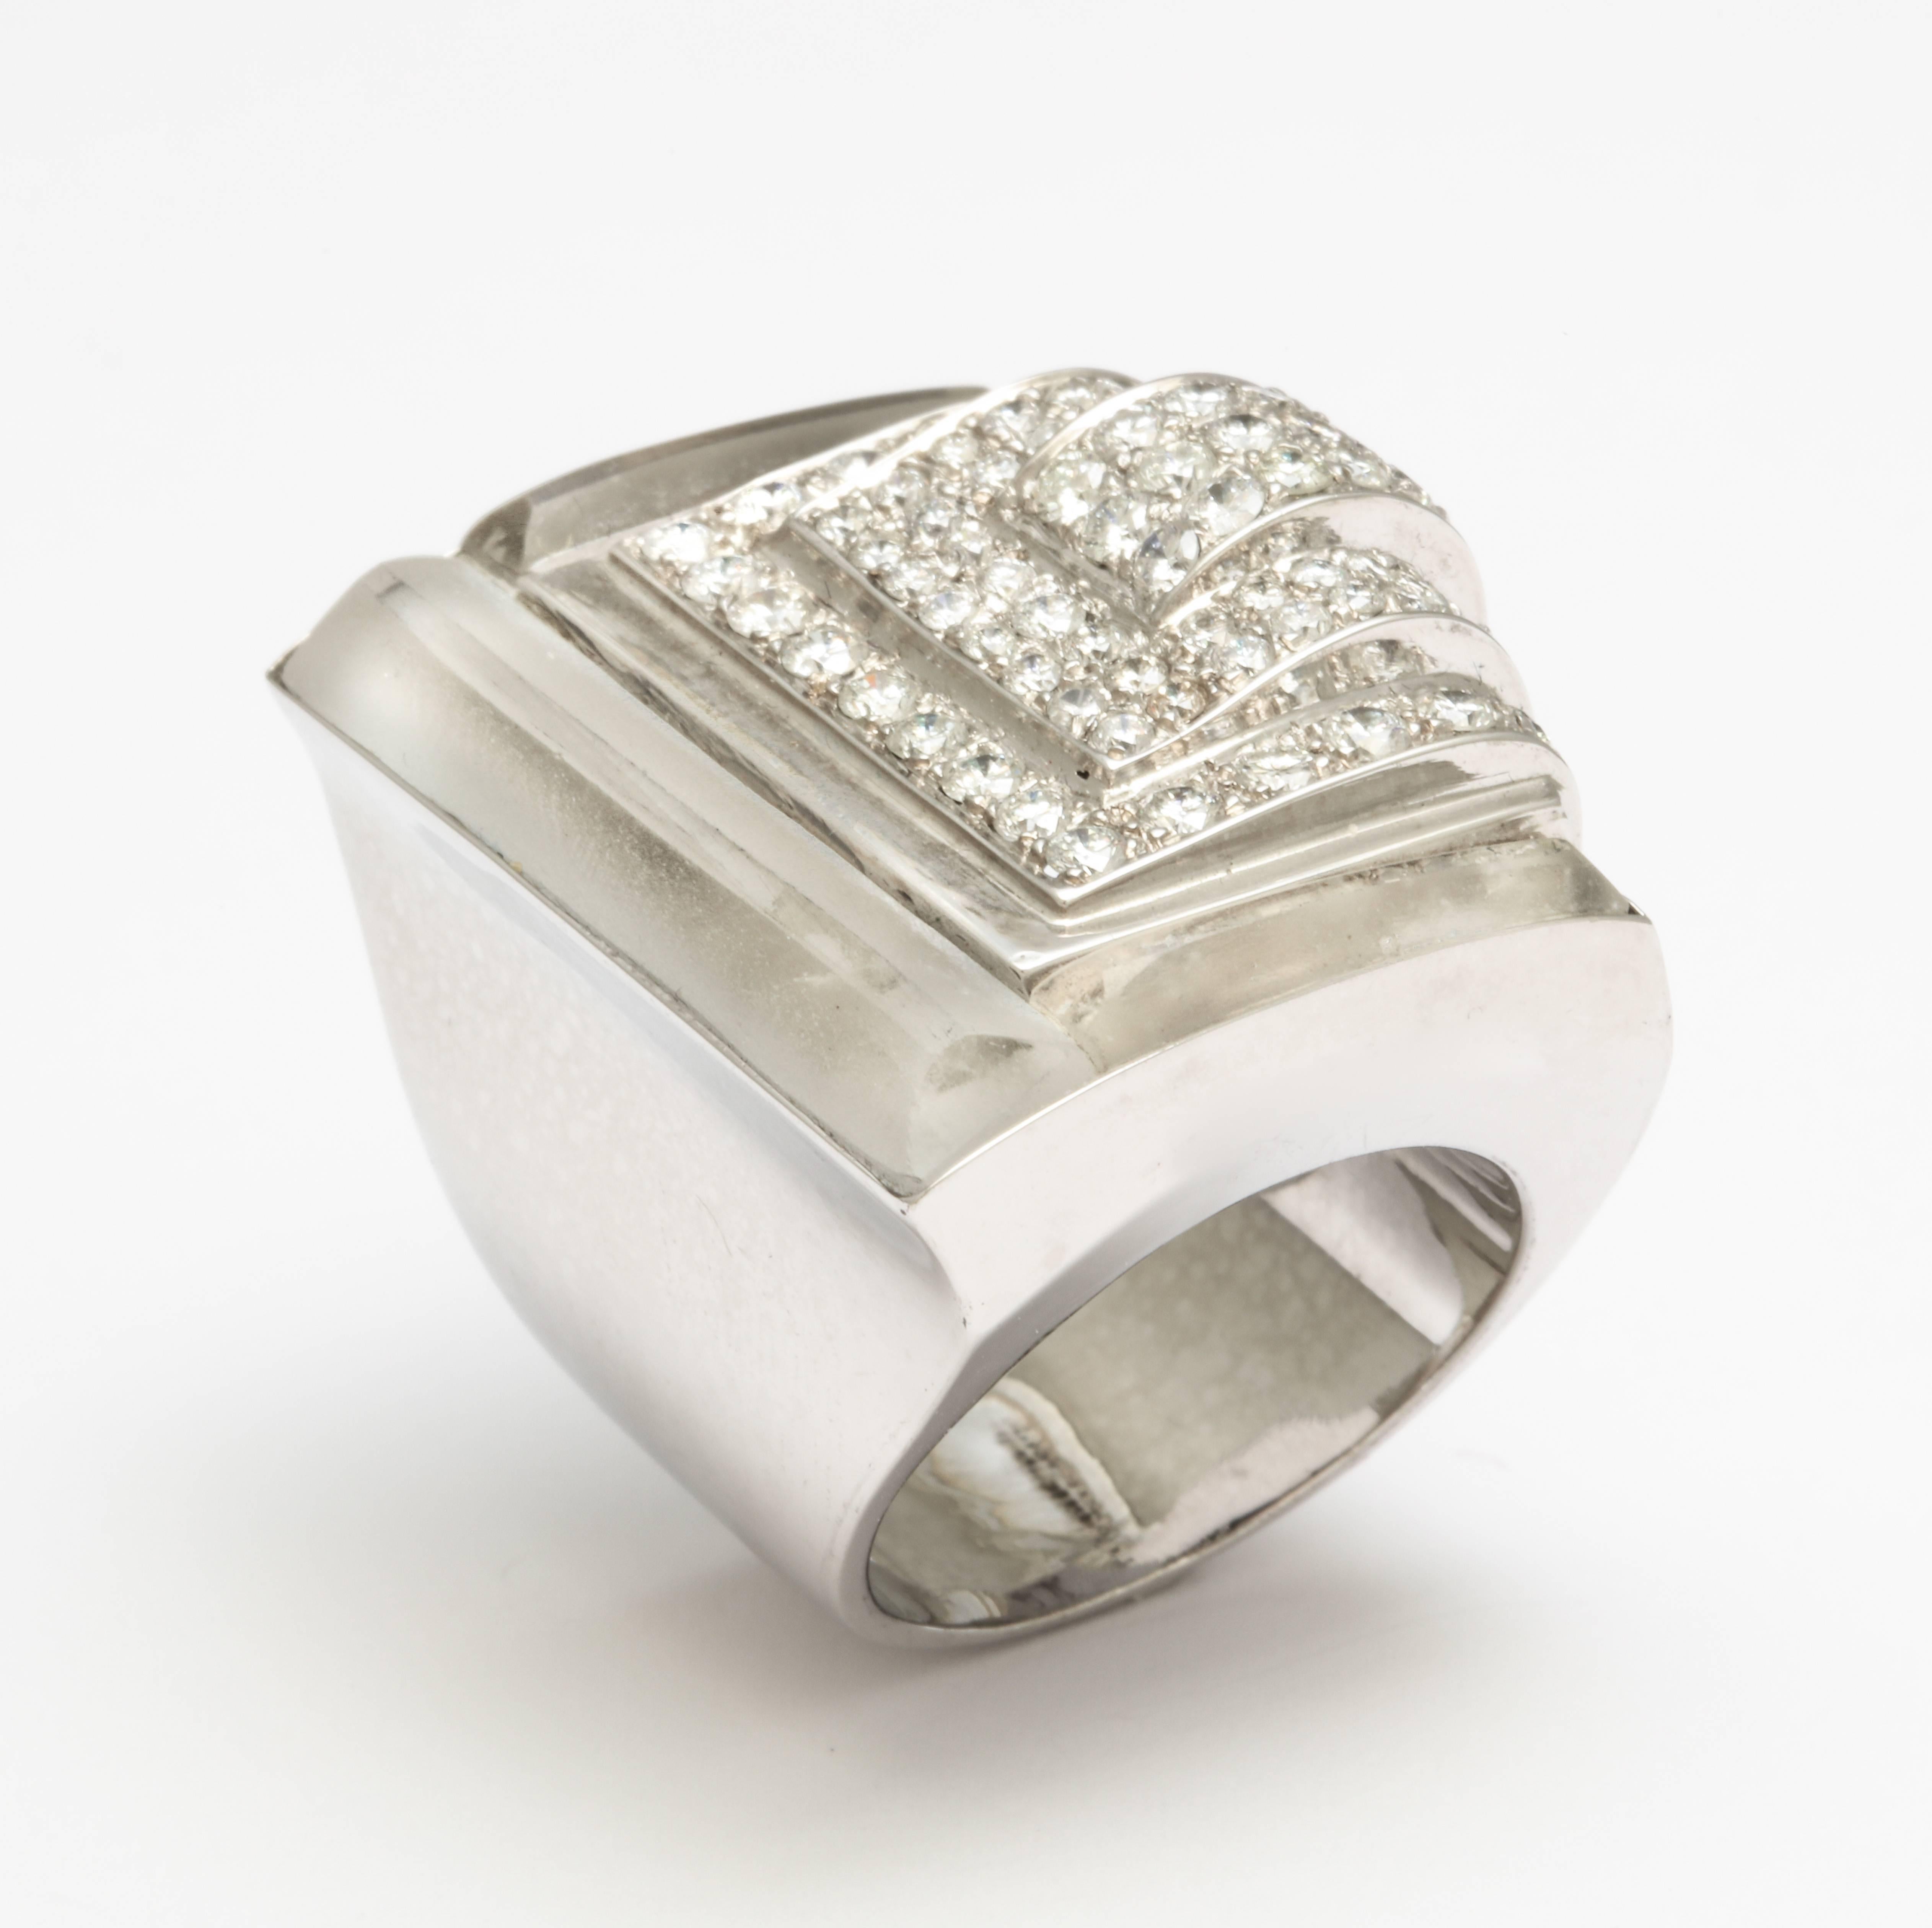 Highly impressive and fashionable, this architectural 18K white gold ring features three carved and frosted rock crystal panels framing a wave of stepped rows of diamonds (5.20 carats; GH-SI) ending in a cascade over one side. Stretching knuckle to